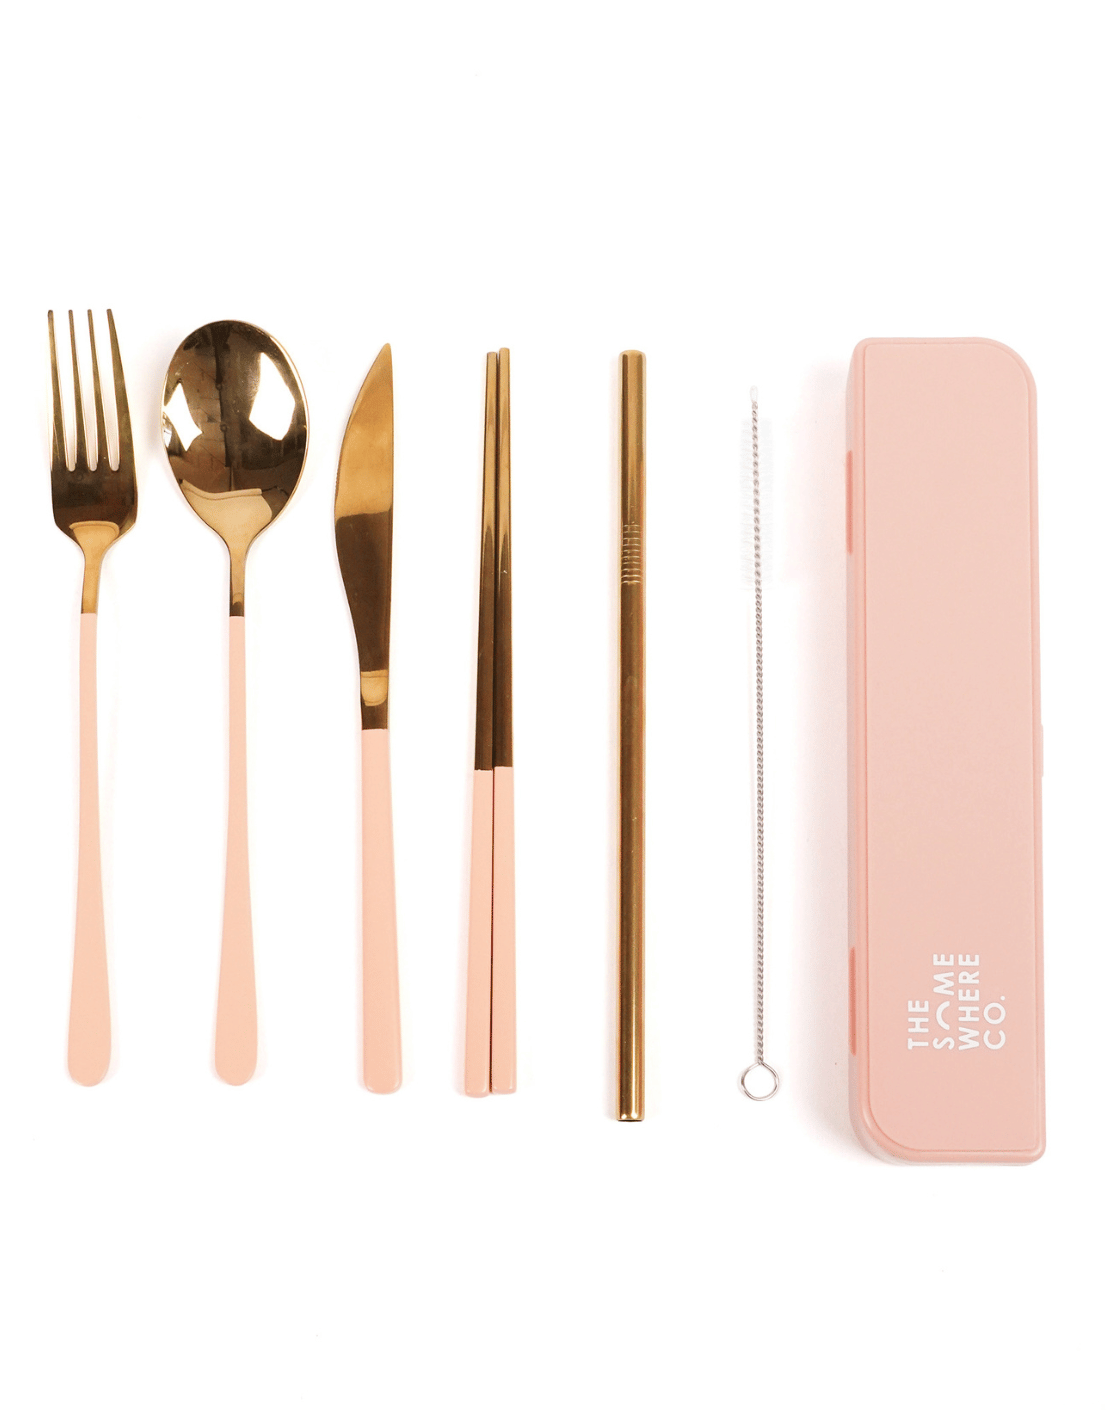 Cutlery Kit - Gold with Blush Handle